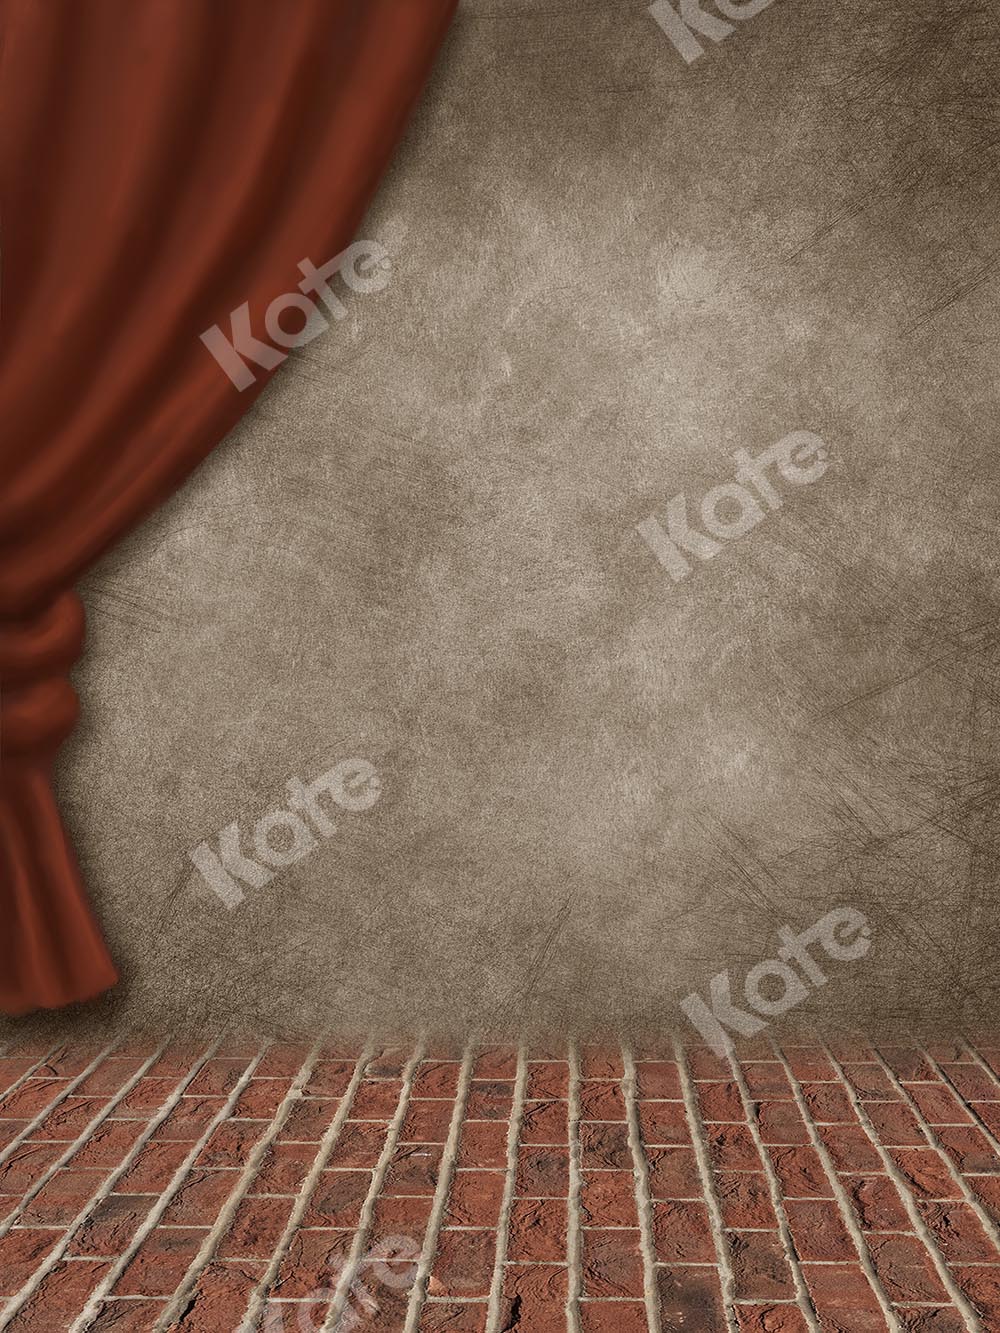 Kate Retro Stage Brick Floor Backdrop Designed by Chain Photography